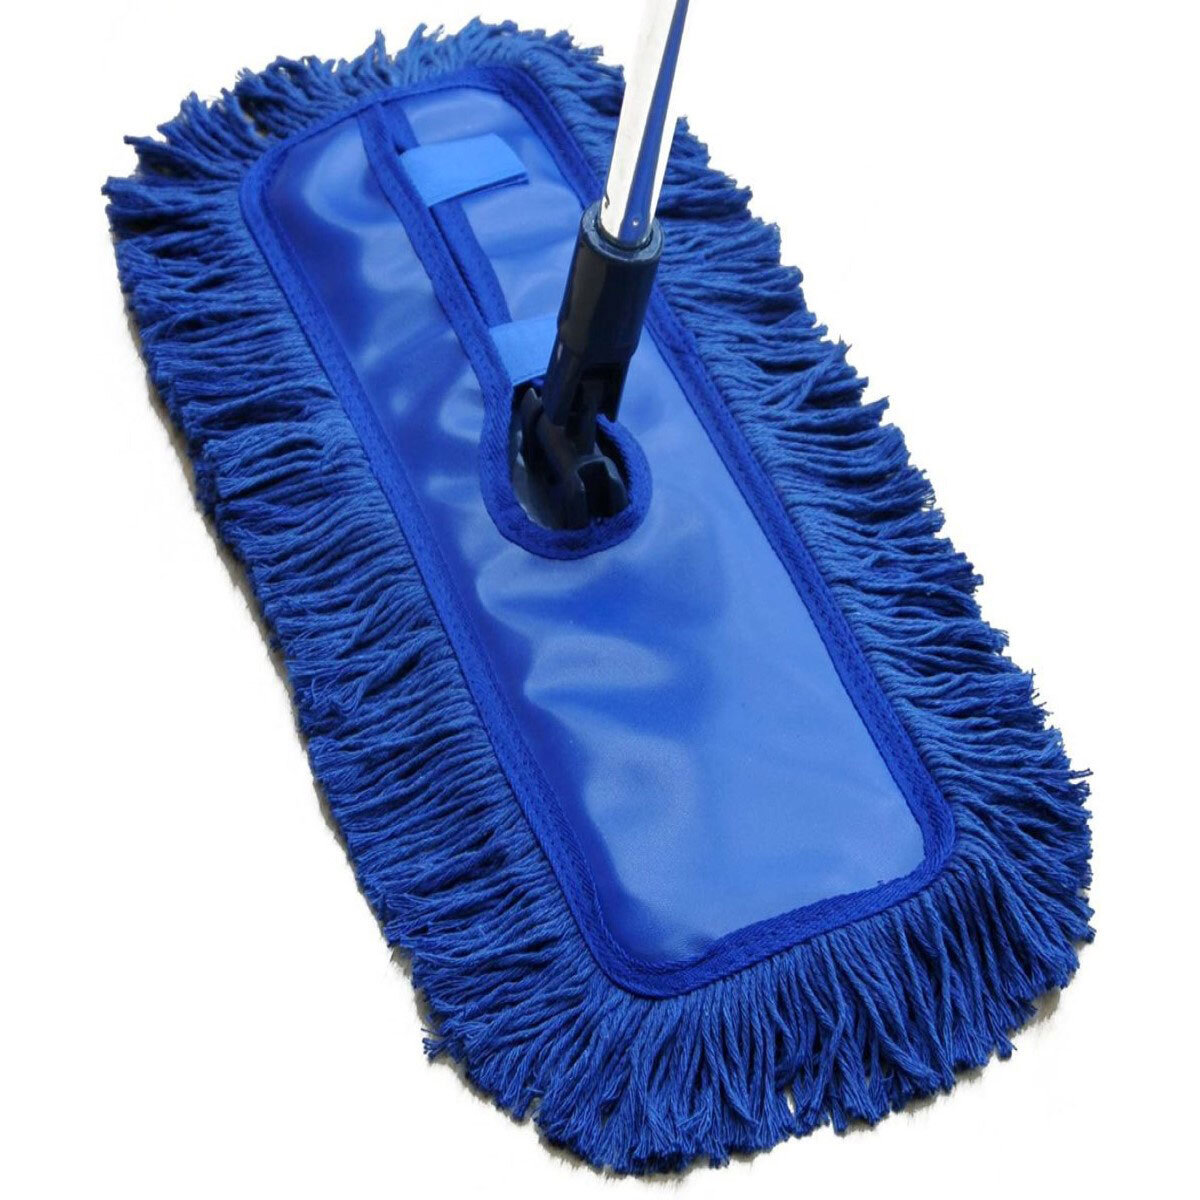 Home Valet Waxed Floor Duster with Extendable Pole